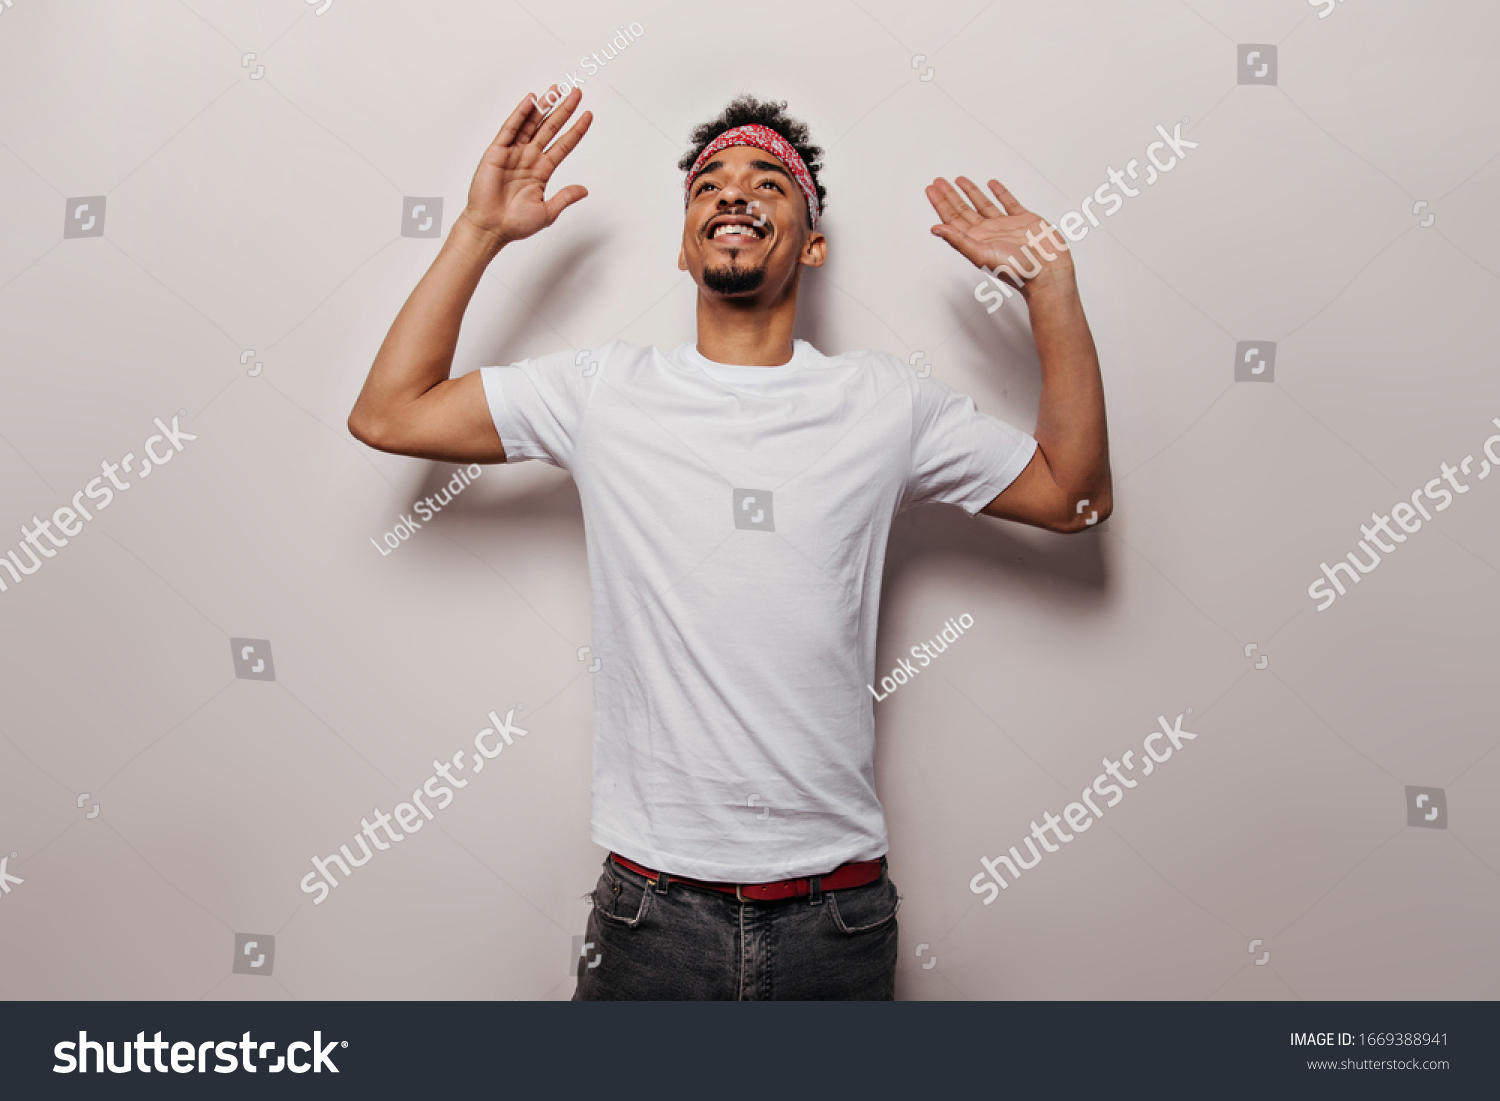 Joyful guy in white T-shirt and black jeans is dancing. Portrait of charming man in tee and pants smiling on isolated background #1669388941